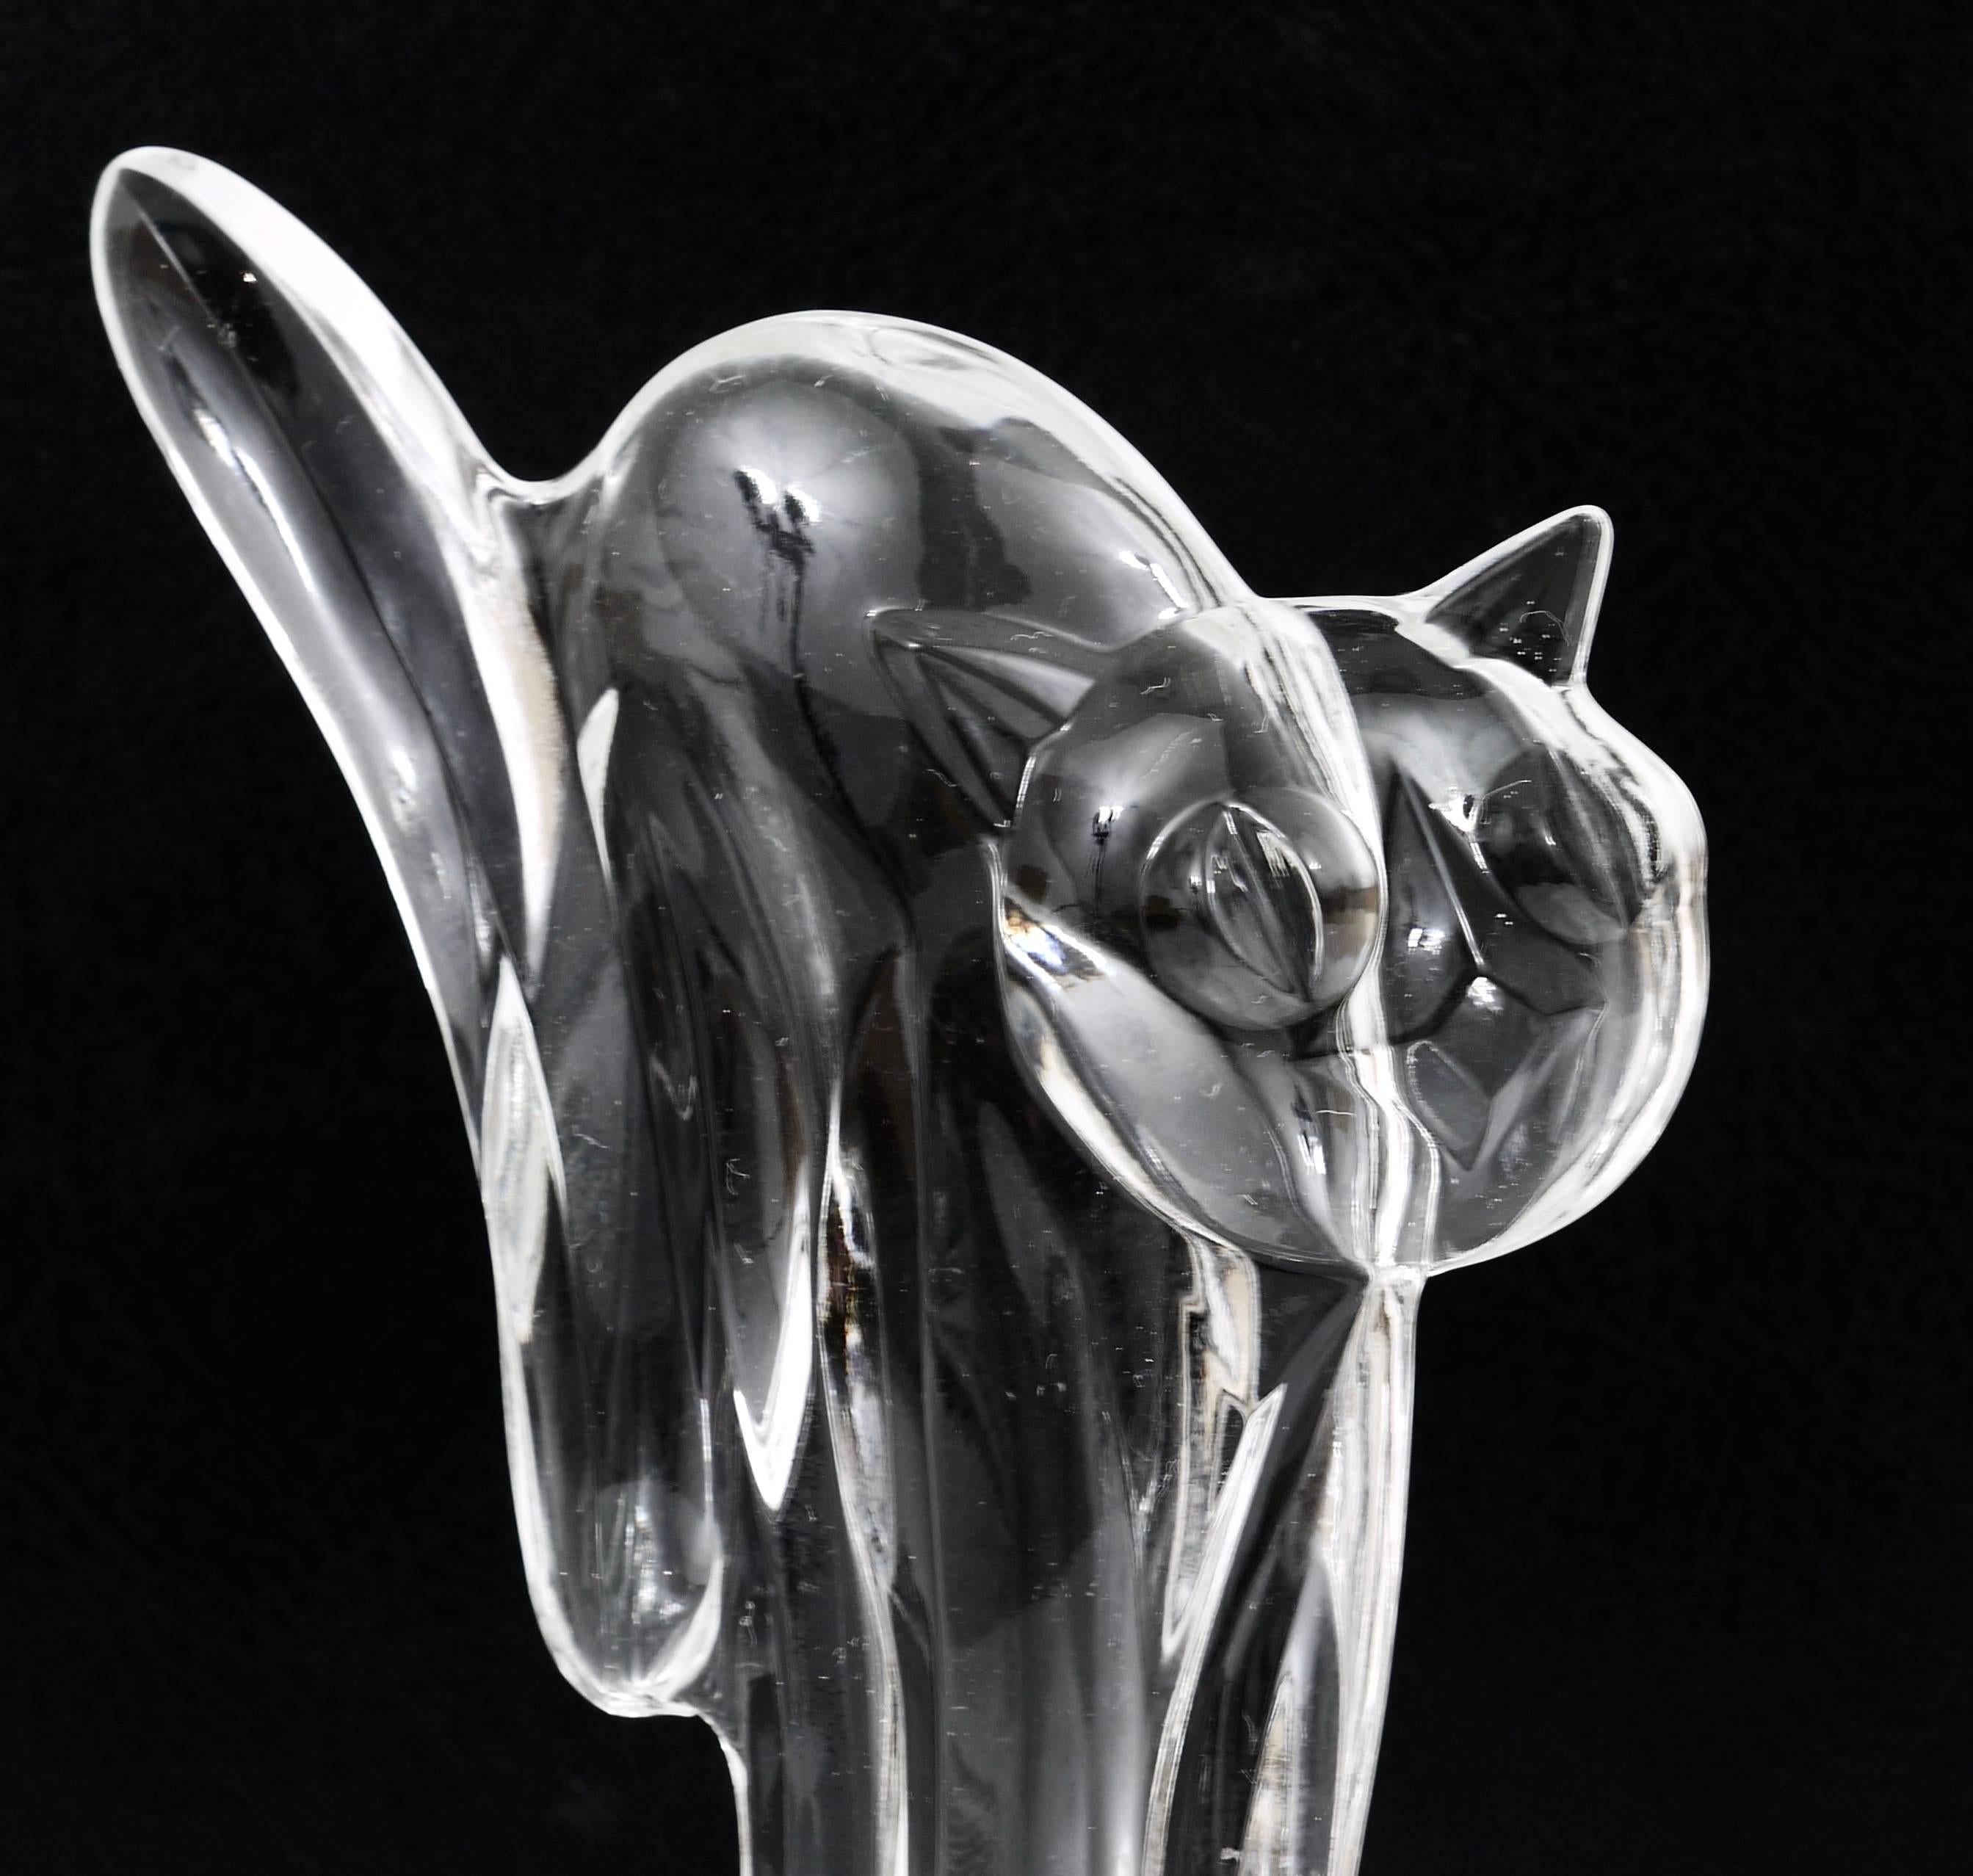 A beautiful and decorative Art Deco cat figurine from the 1930s. Made of clear crystal glass, executed by Ludwig Moser in Czechoslovakia. Excellent condition.